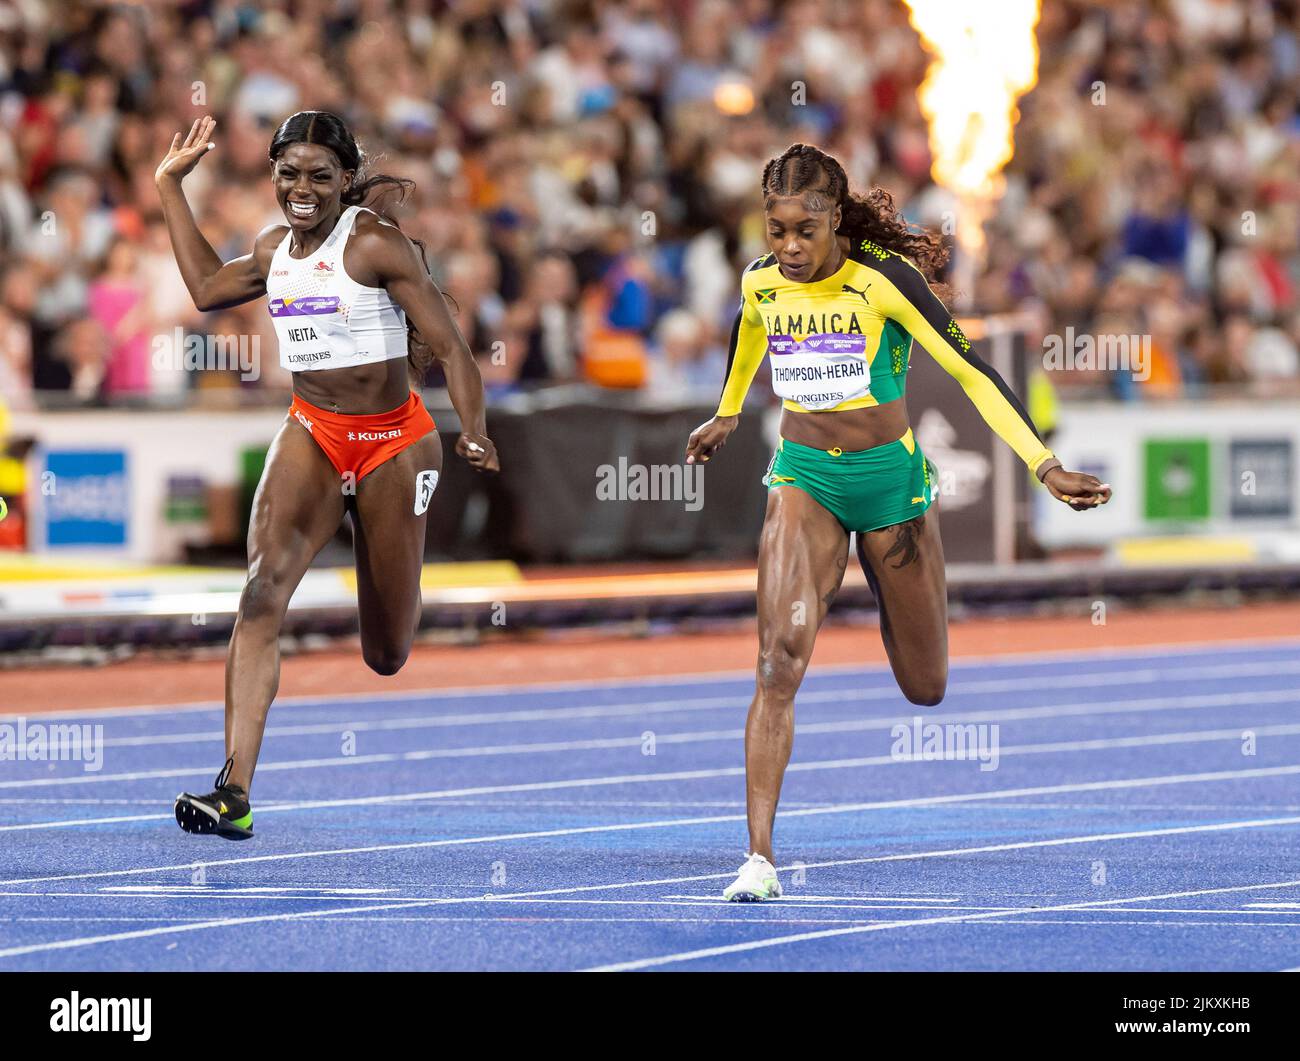 3rd August 2022; Alexander Stadium, Birmingham, Midlands, England: Day 6 of the 2022 Commonwealth Games: Elaine Thompson-Herah (JAM) crossing the finish line to win the Gold Medal in the Women's 100m Final in 10.95s alongside Daryll Neita (ENG) finishing in third place to win the Bronze Medal in 11.07sec Stock Photo